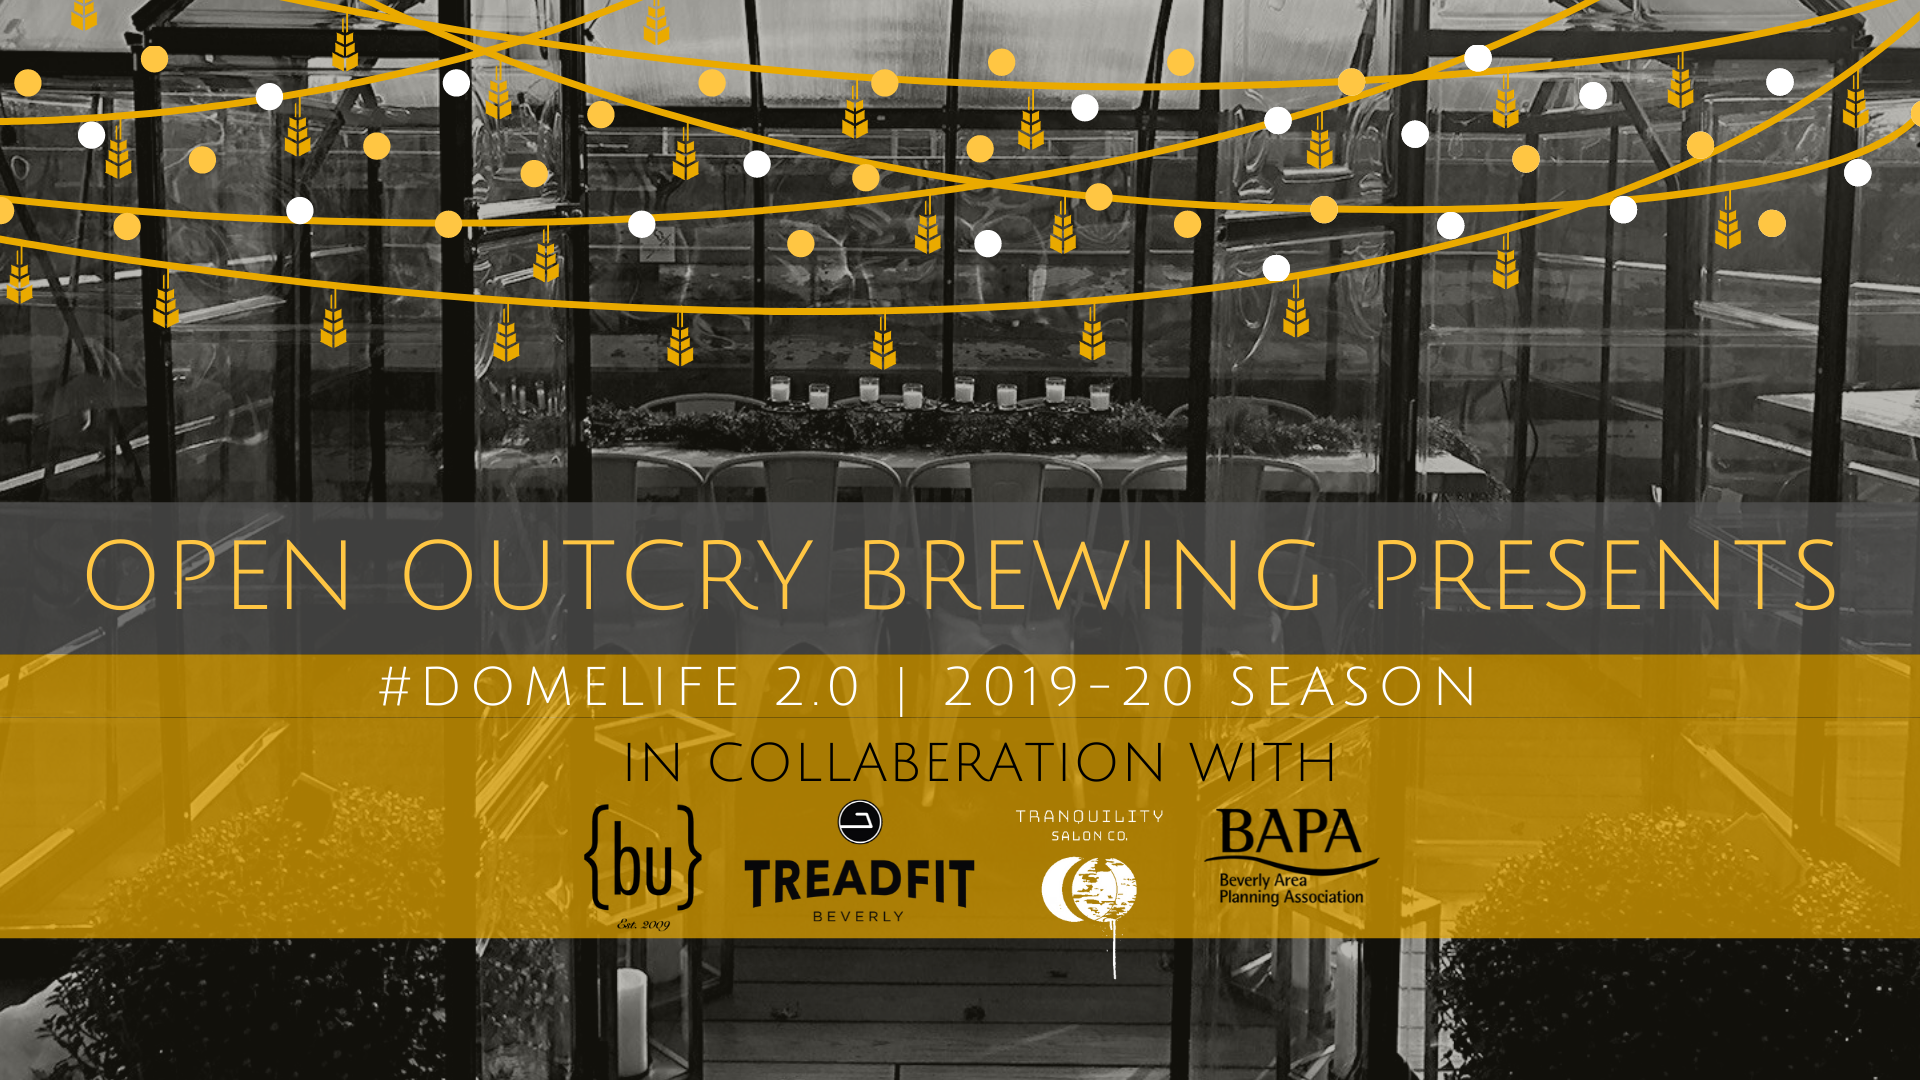 January 2020 #DomeLife 2.0 - An Open Outcry Brewing Rooftop Beer Garden Experience